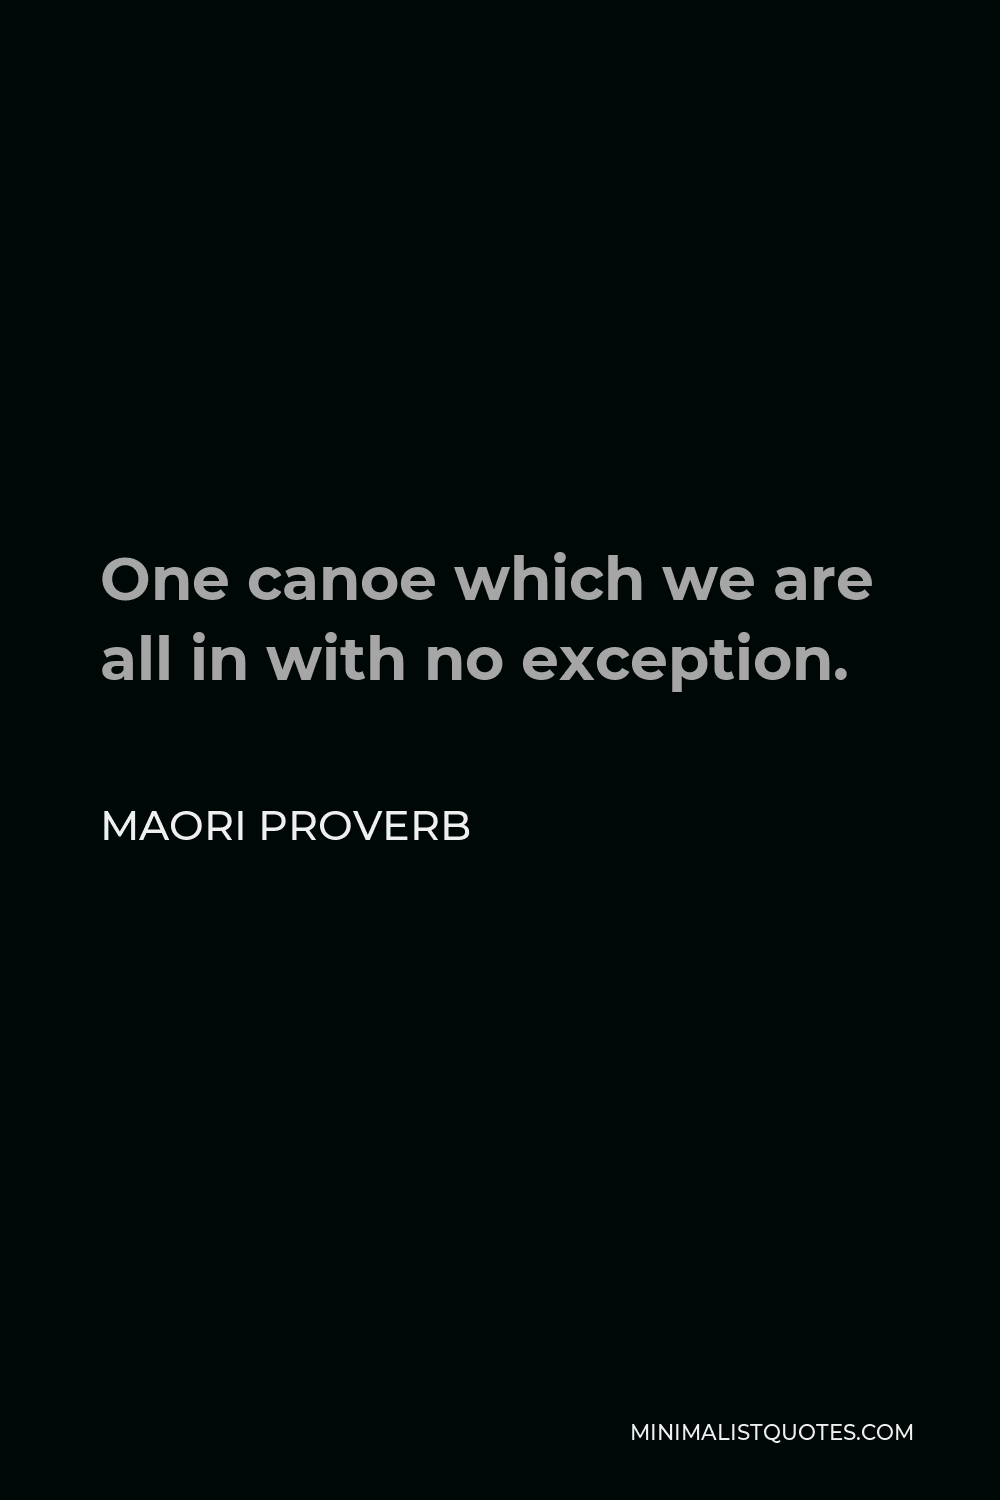 Maori Proverb Quote - One canoe which we are all in with no exception.